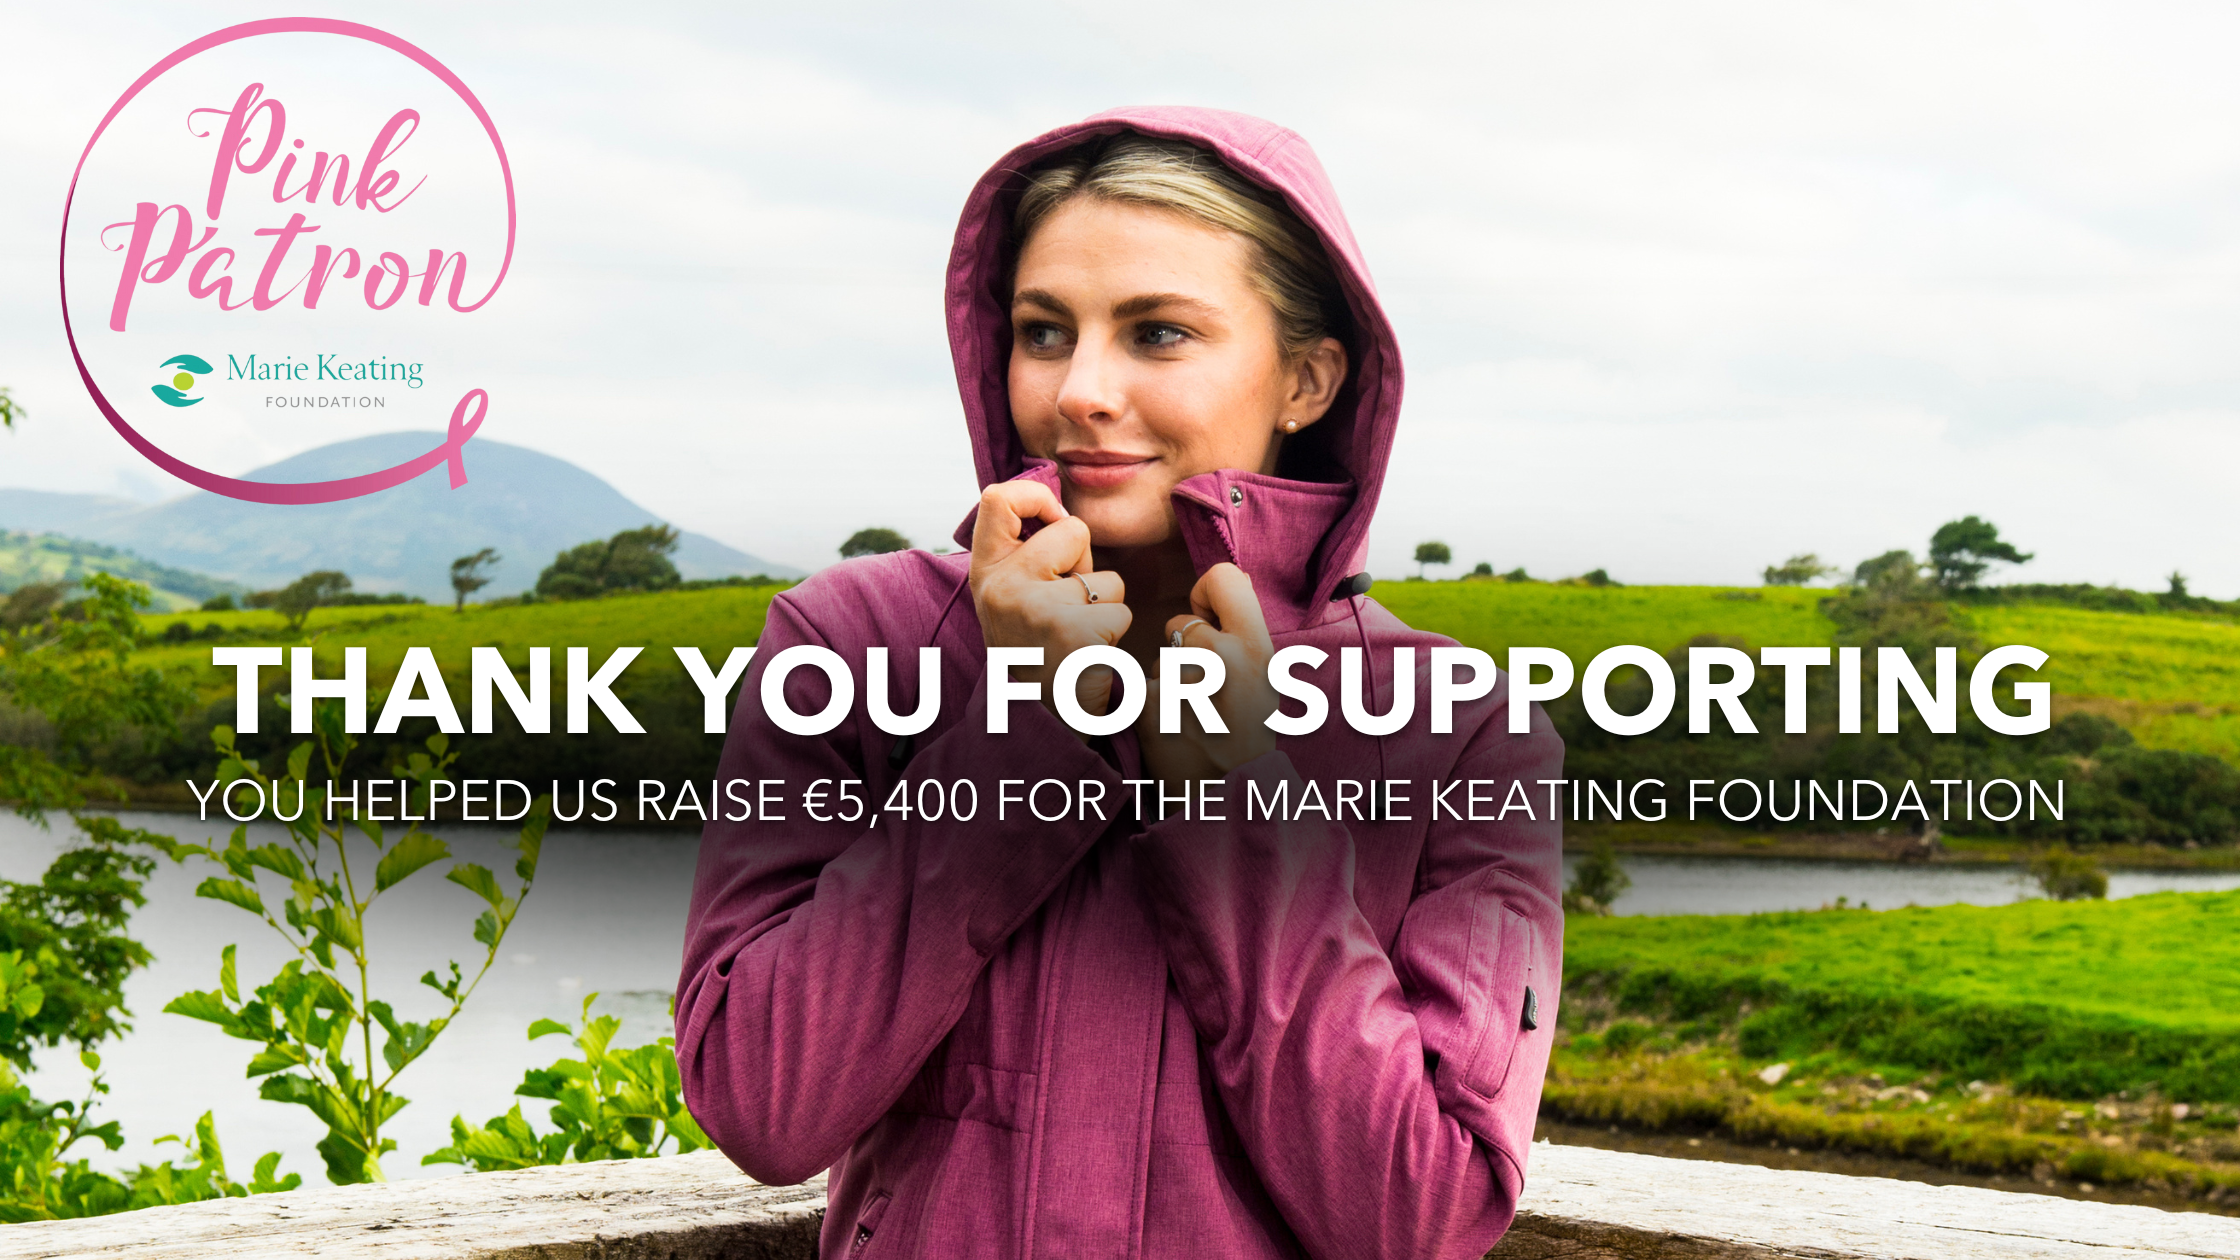 Portwest raise €5.4k for the Marie Keating Foundation